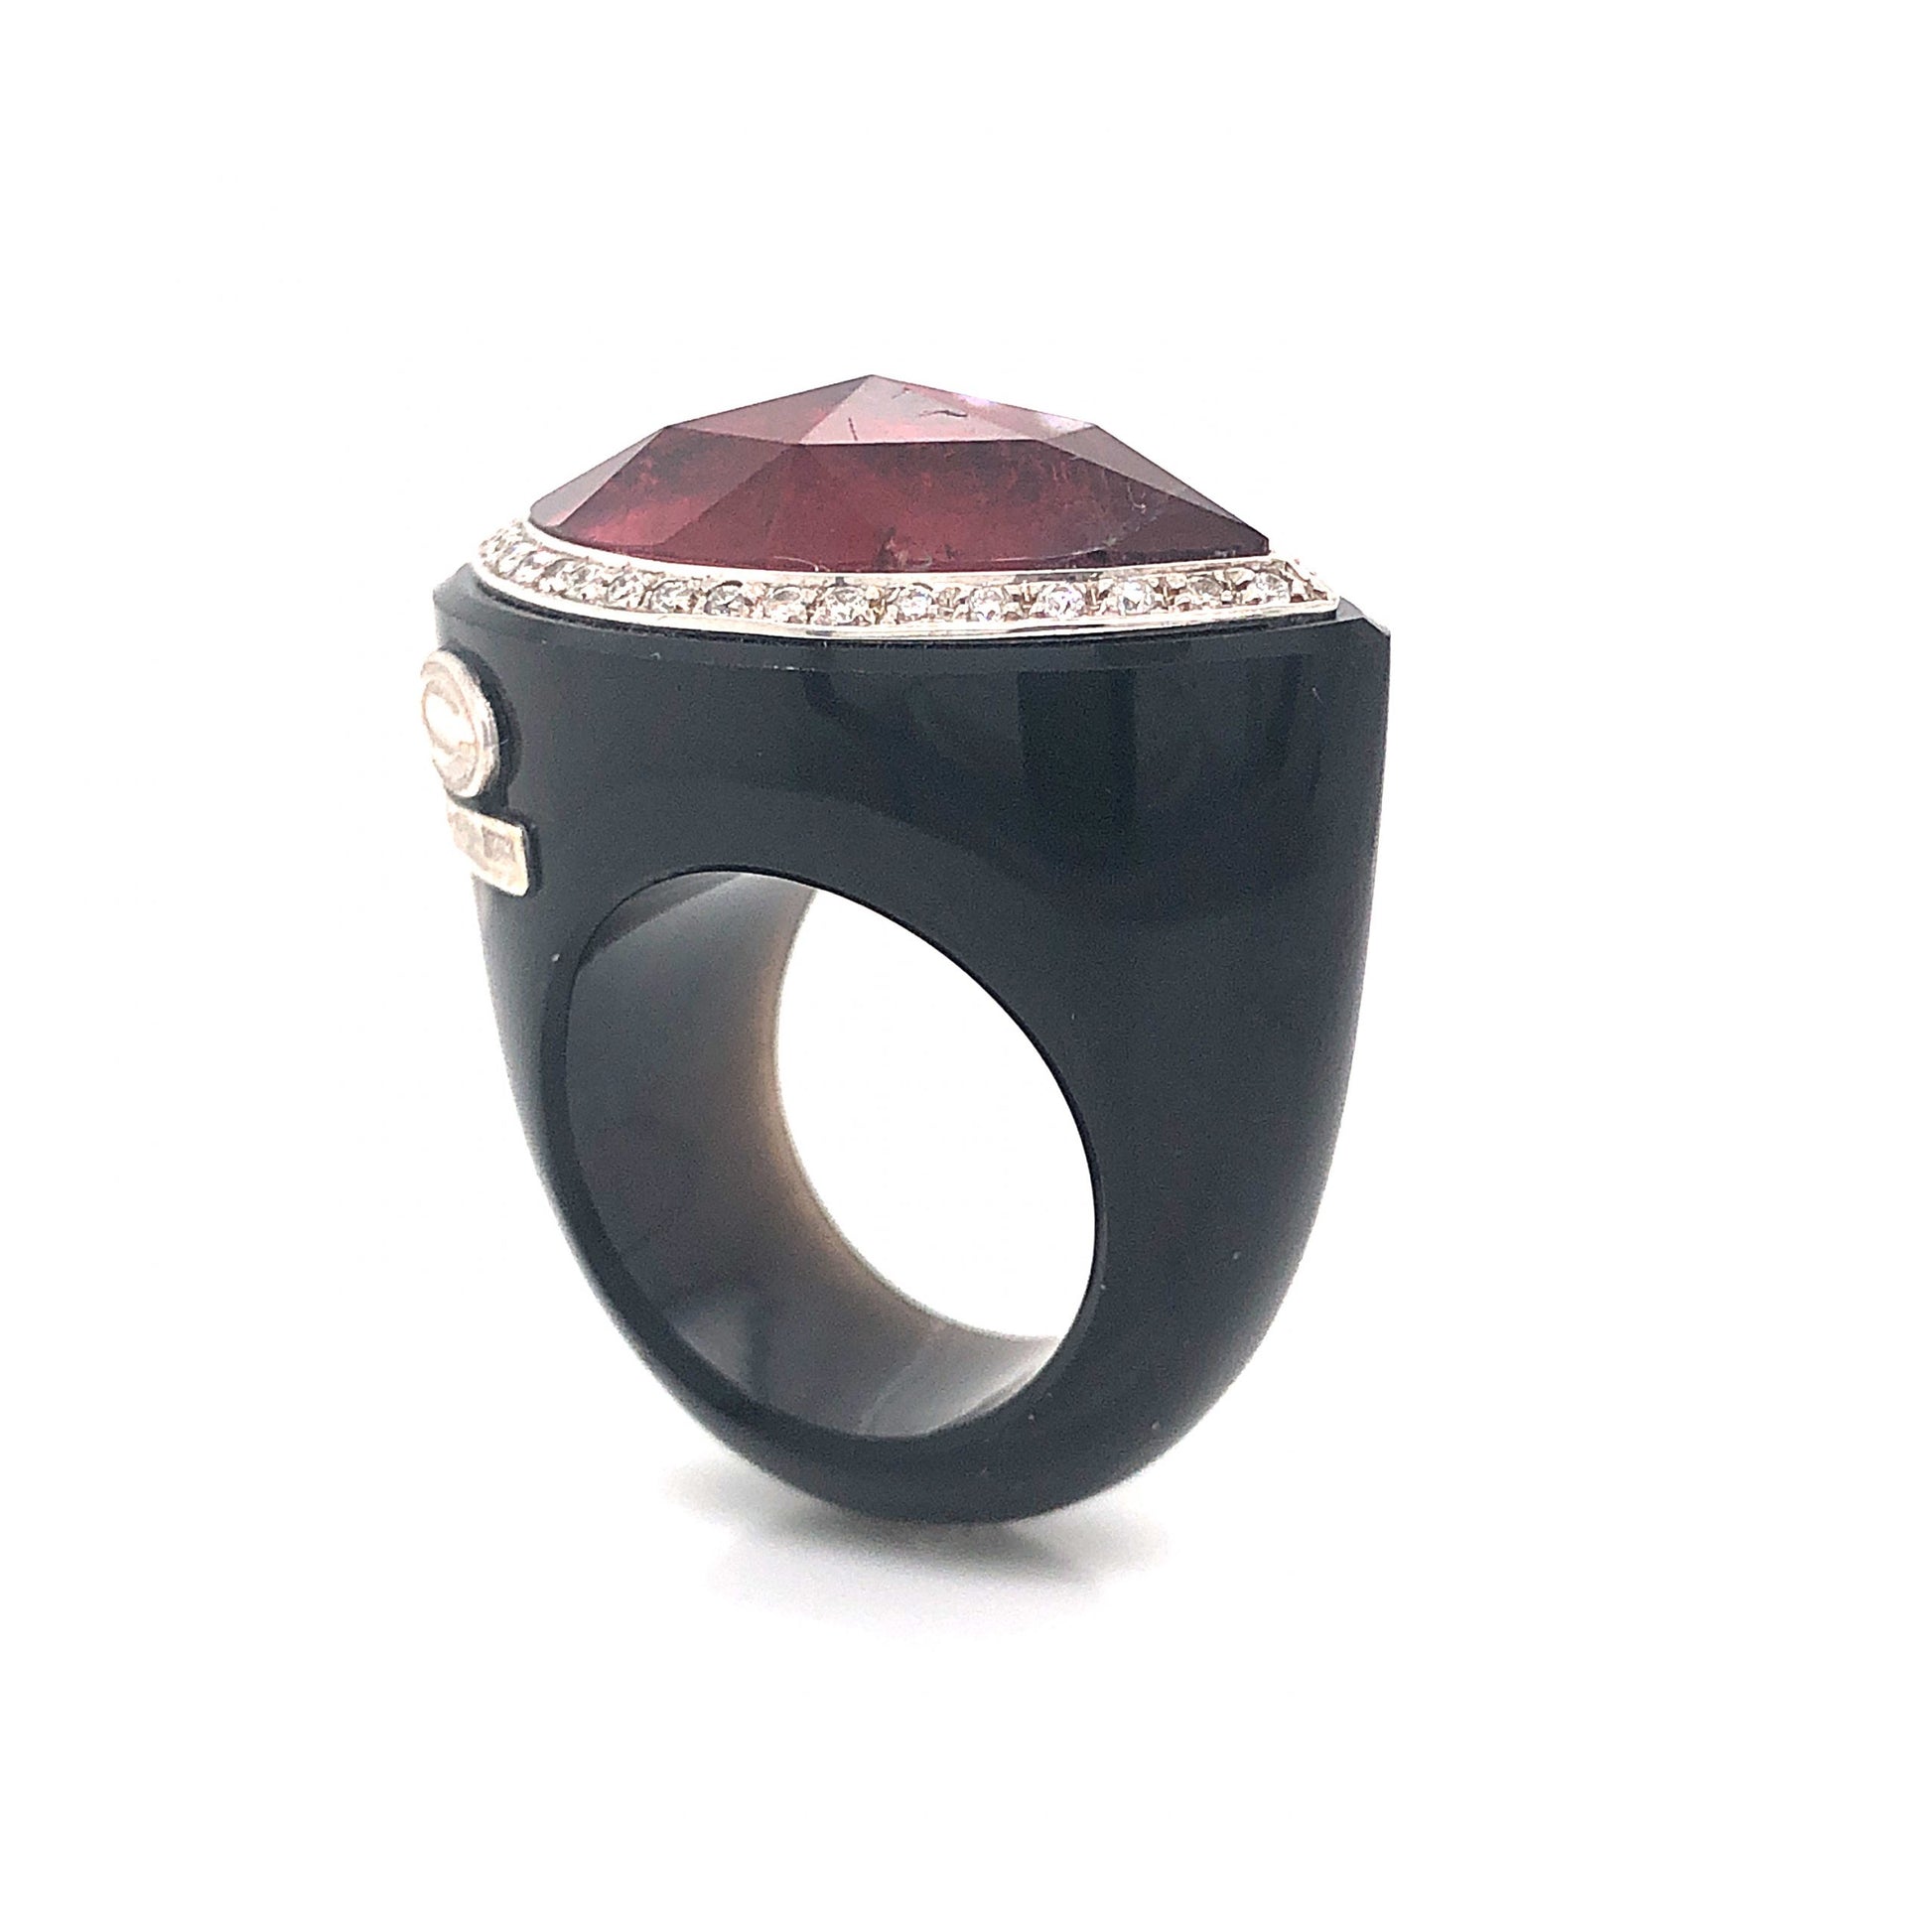 Pietra Di Luna Pink Tourmaline & Diamond Cocktail Ring in 18k White GoldComposition: Platinum Ring Size: 6.5 Total Diamond Weight: .54ct Total Gram Weight: 18.1 g Inscription: 161 FO, 750 ITALY , PIETRA DE LUNA 
      